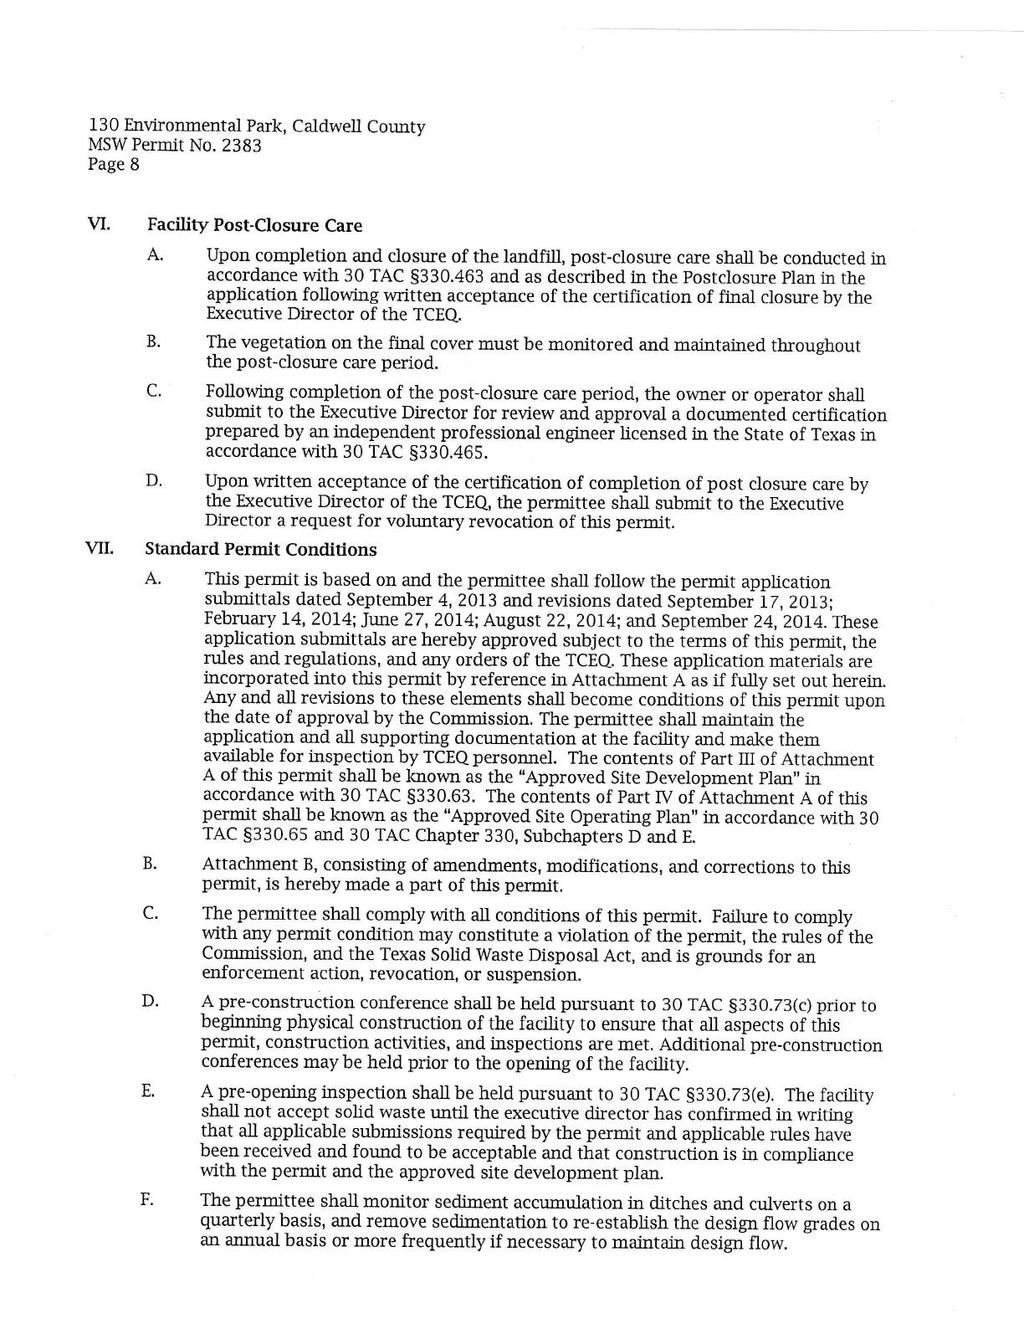 Page 8 VI. VII. Facility Post-Closure Care A. Upon completion and closure of the landfill, post-closure care shall be conducted in accordance with 30 TAC 330.